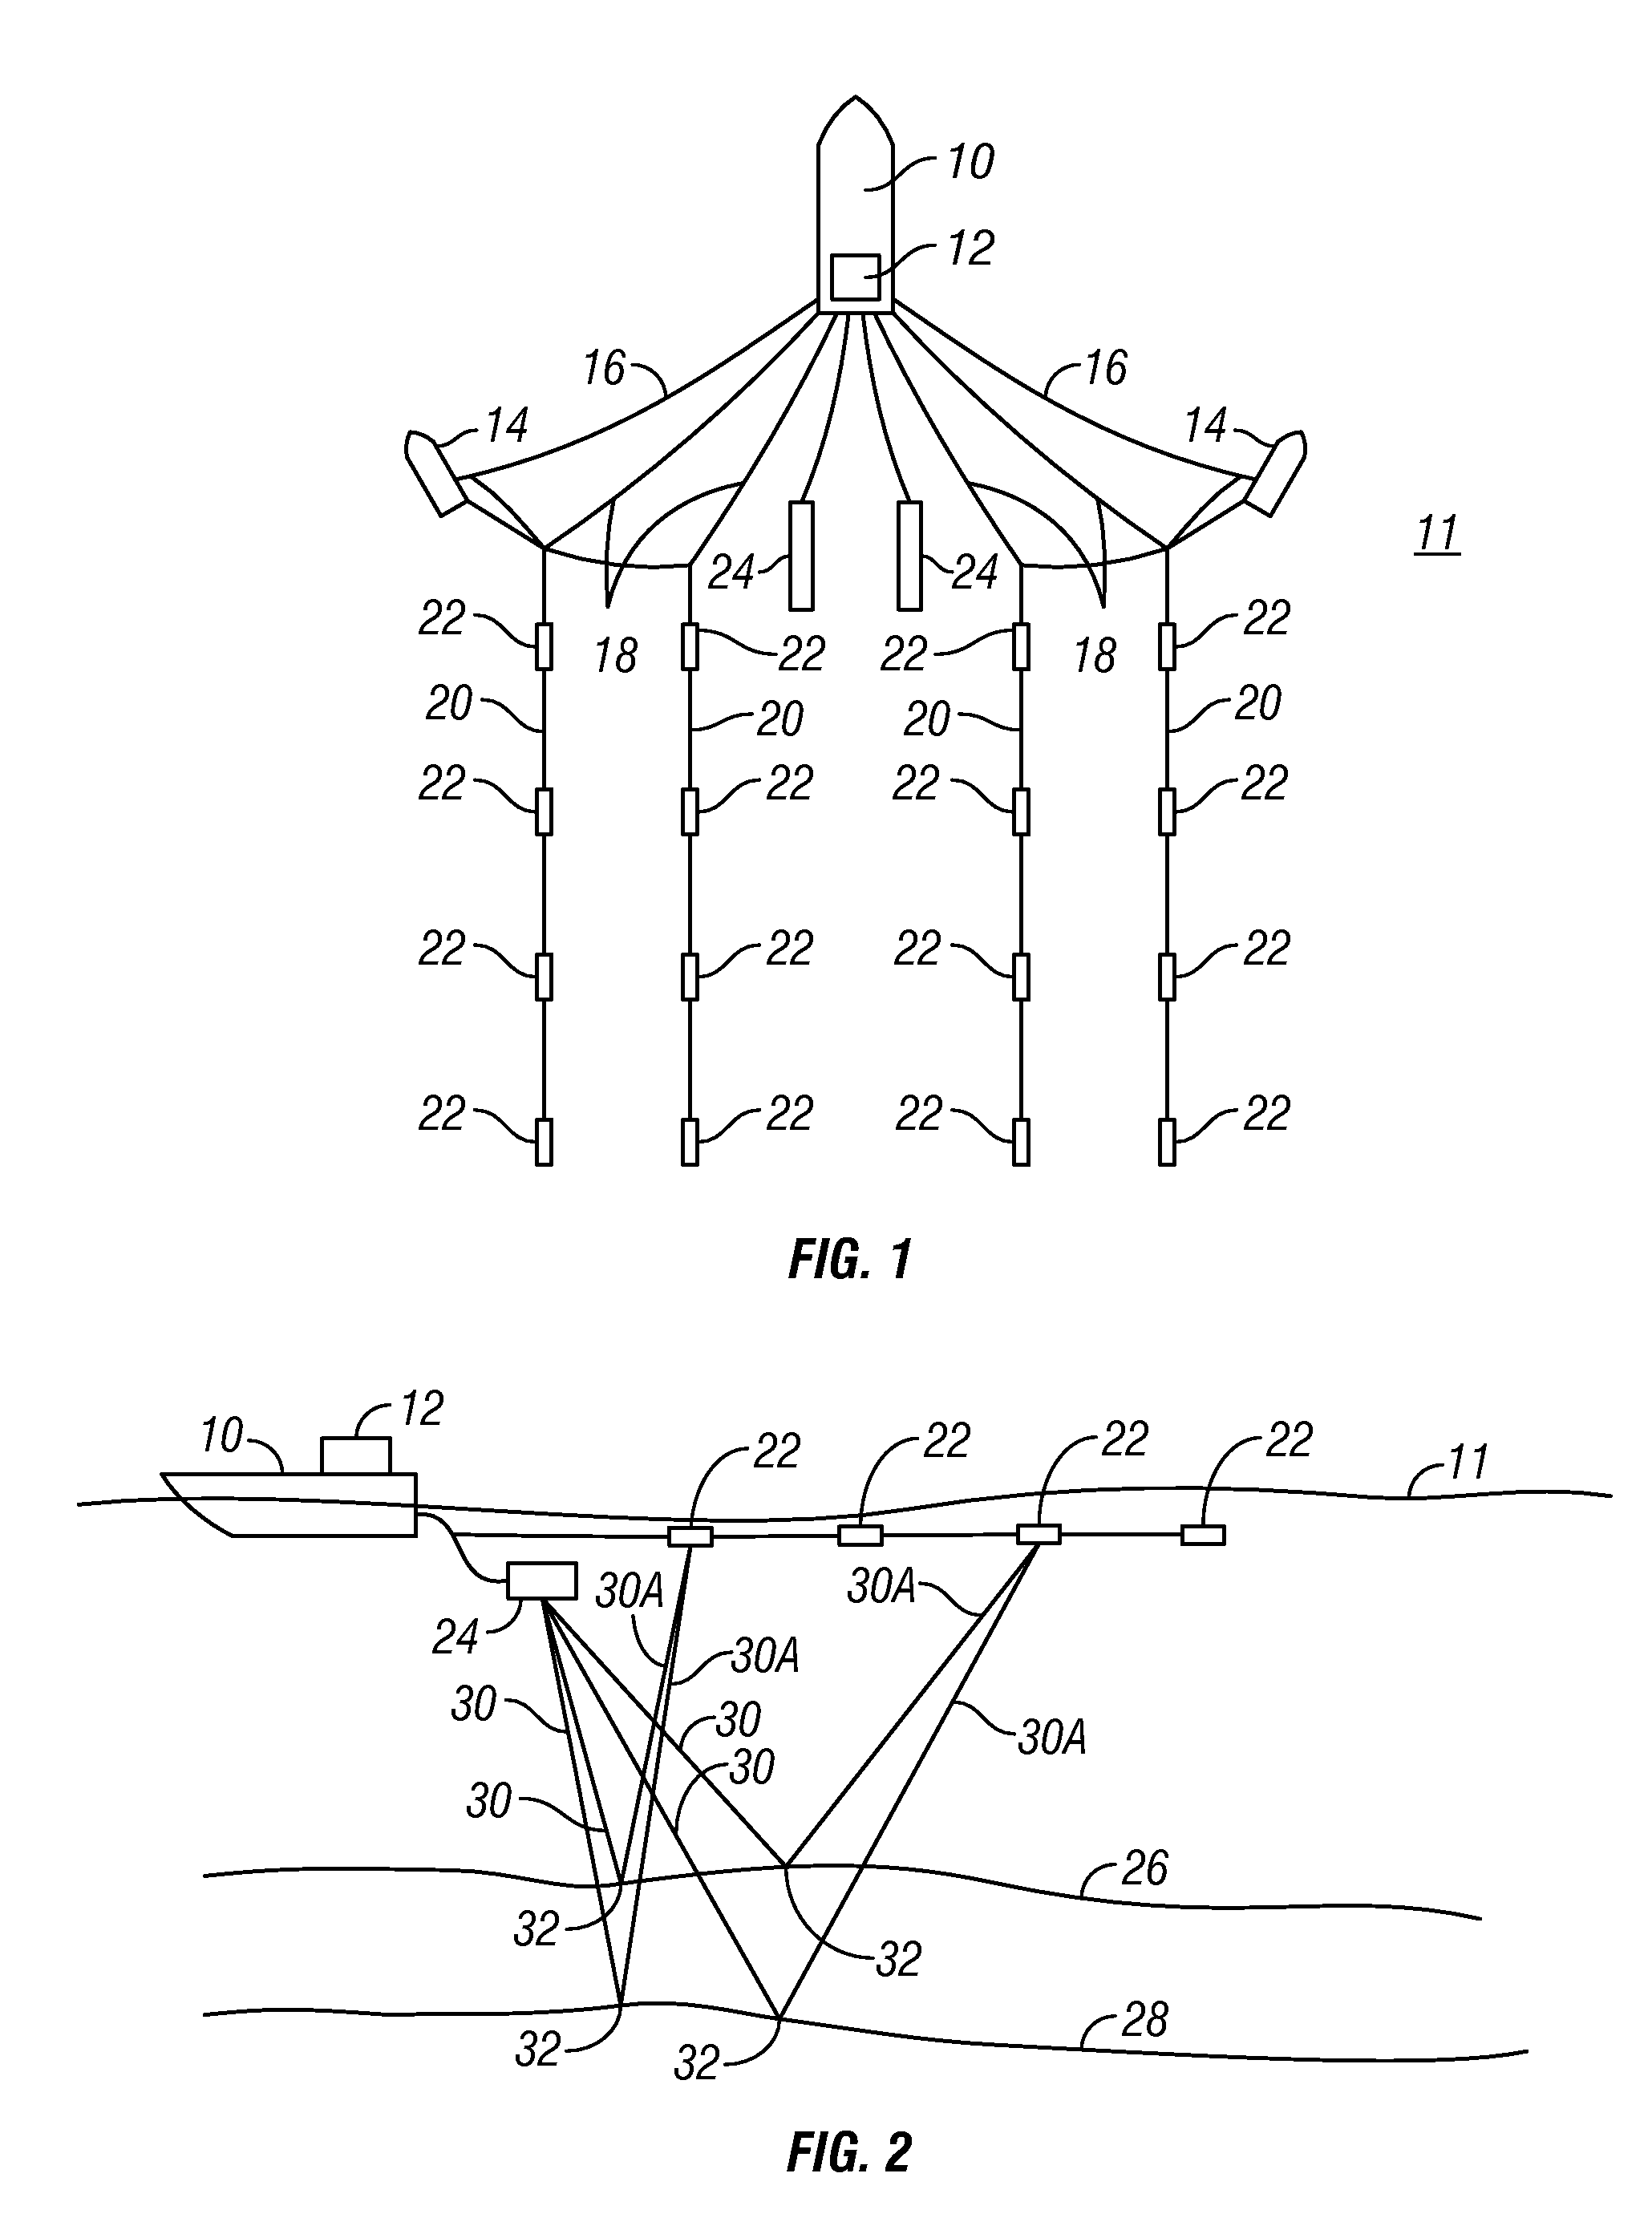 Method for determining adequacy of seismic data coverage of a subsurface area being surveyed